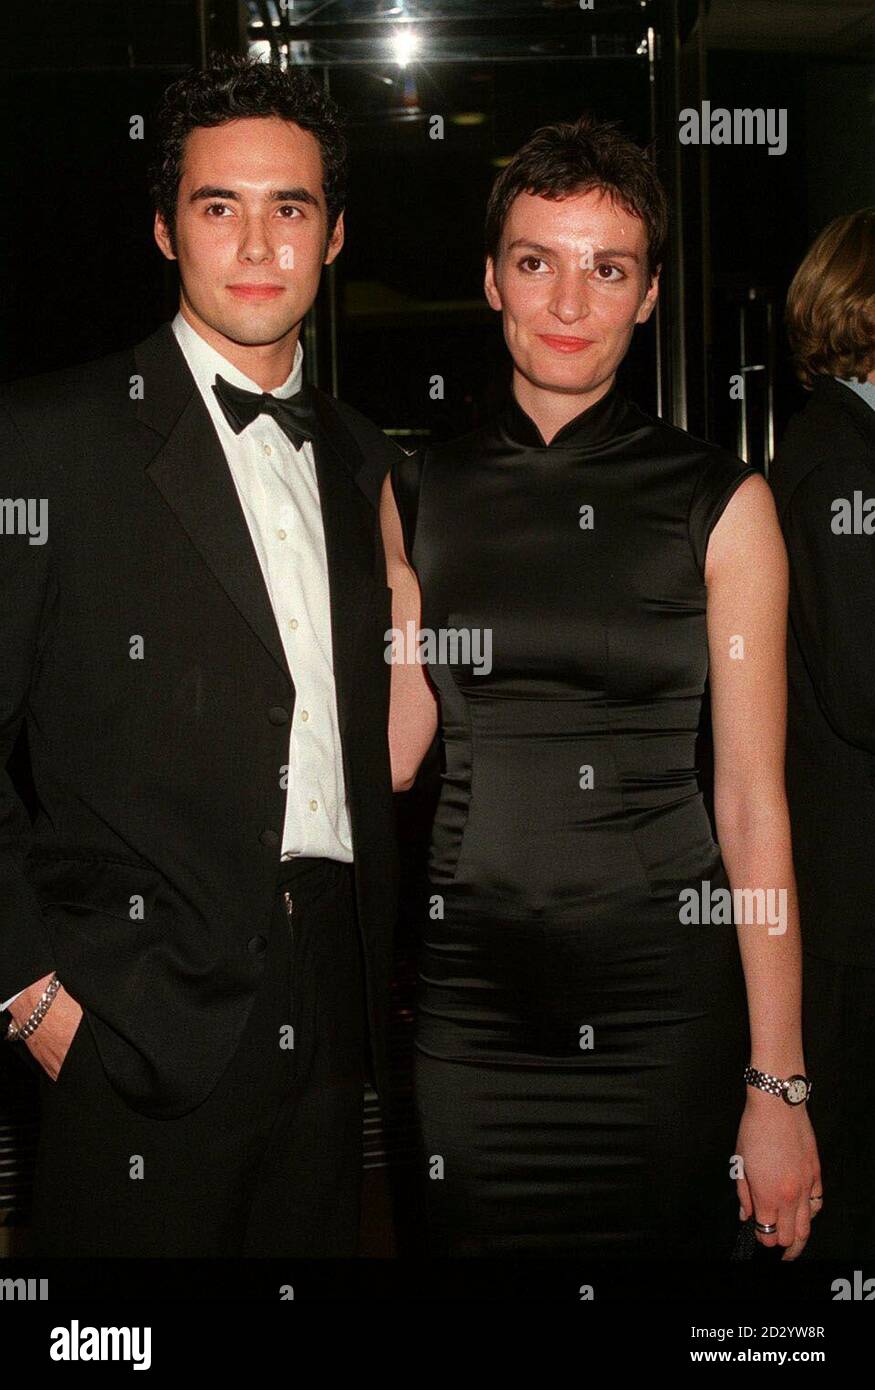 DANIELA NARDINI AND STEPHEN SHEPHERD AT THE BRITISH COMEDY AWARDS IN LONDON. * 1/12/2000: This Life star Daniela Nardini, spoke of her sorrow at the feud which has split her family. The actress' father Aldo and his brother Peter are locked in a court battle over the use of the Nardini name after a bitter boardroom fall-out in the family business. The firm has been known as one of Britain's top ice cream makers since it was set up in Scotland by Miss Nardini's great-grandparents Pietro and Rosa in the 1880s. 'I think if anything I feel sad mostly, that it has got to this stage, Miss Nardini t Stock Photo